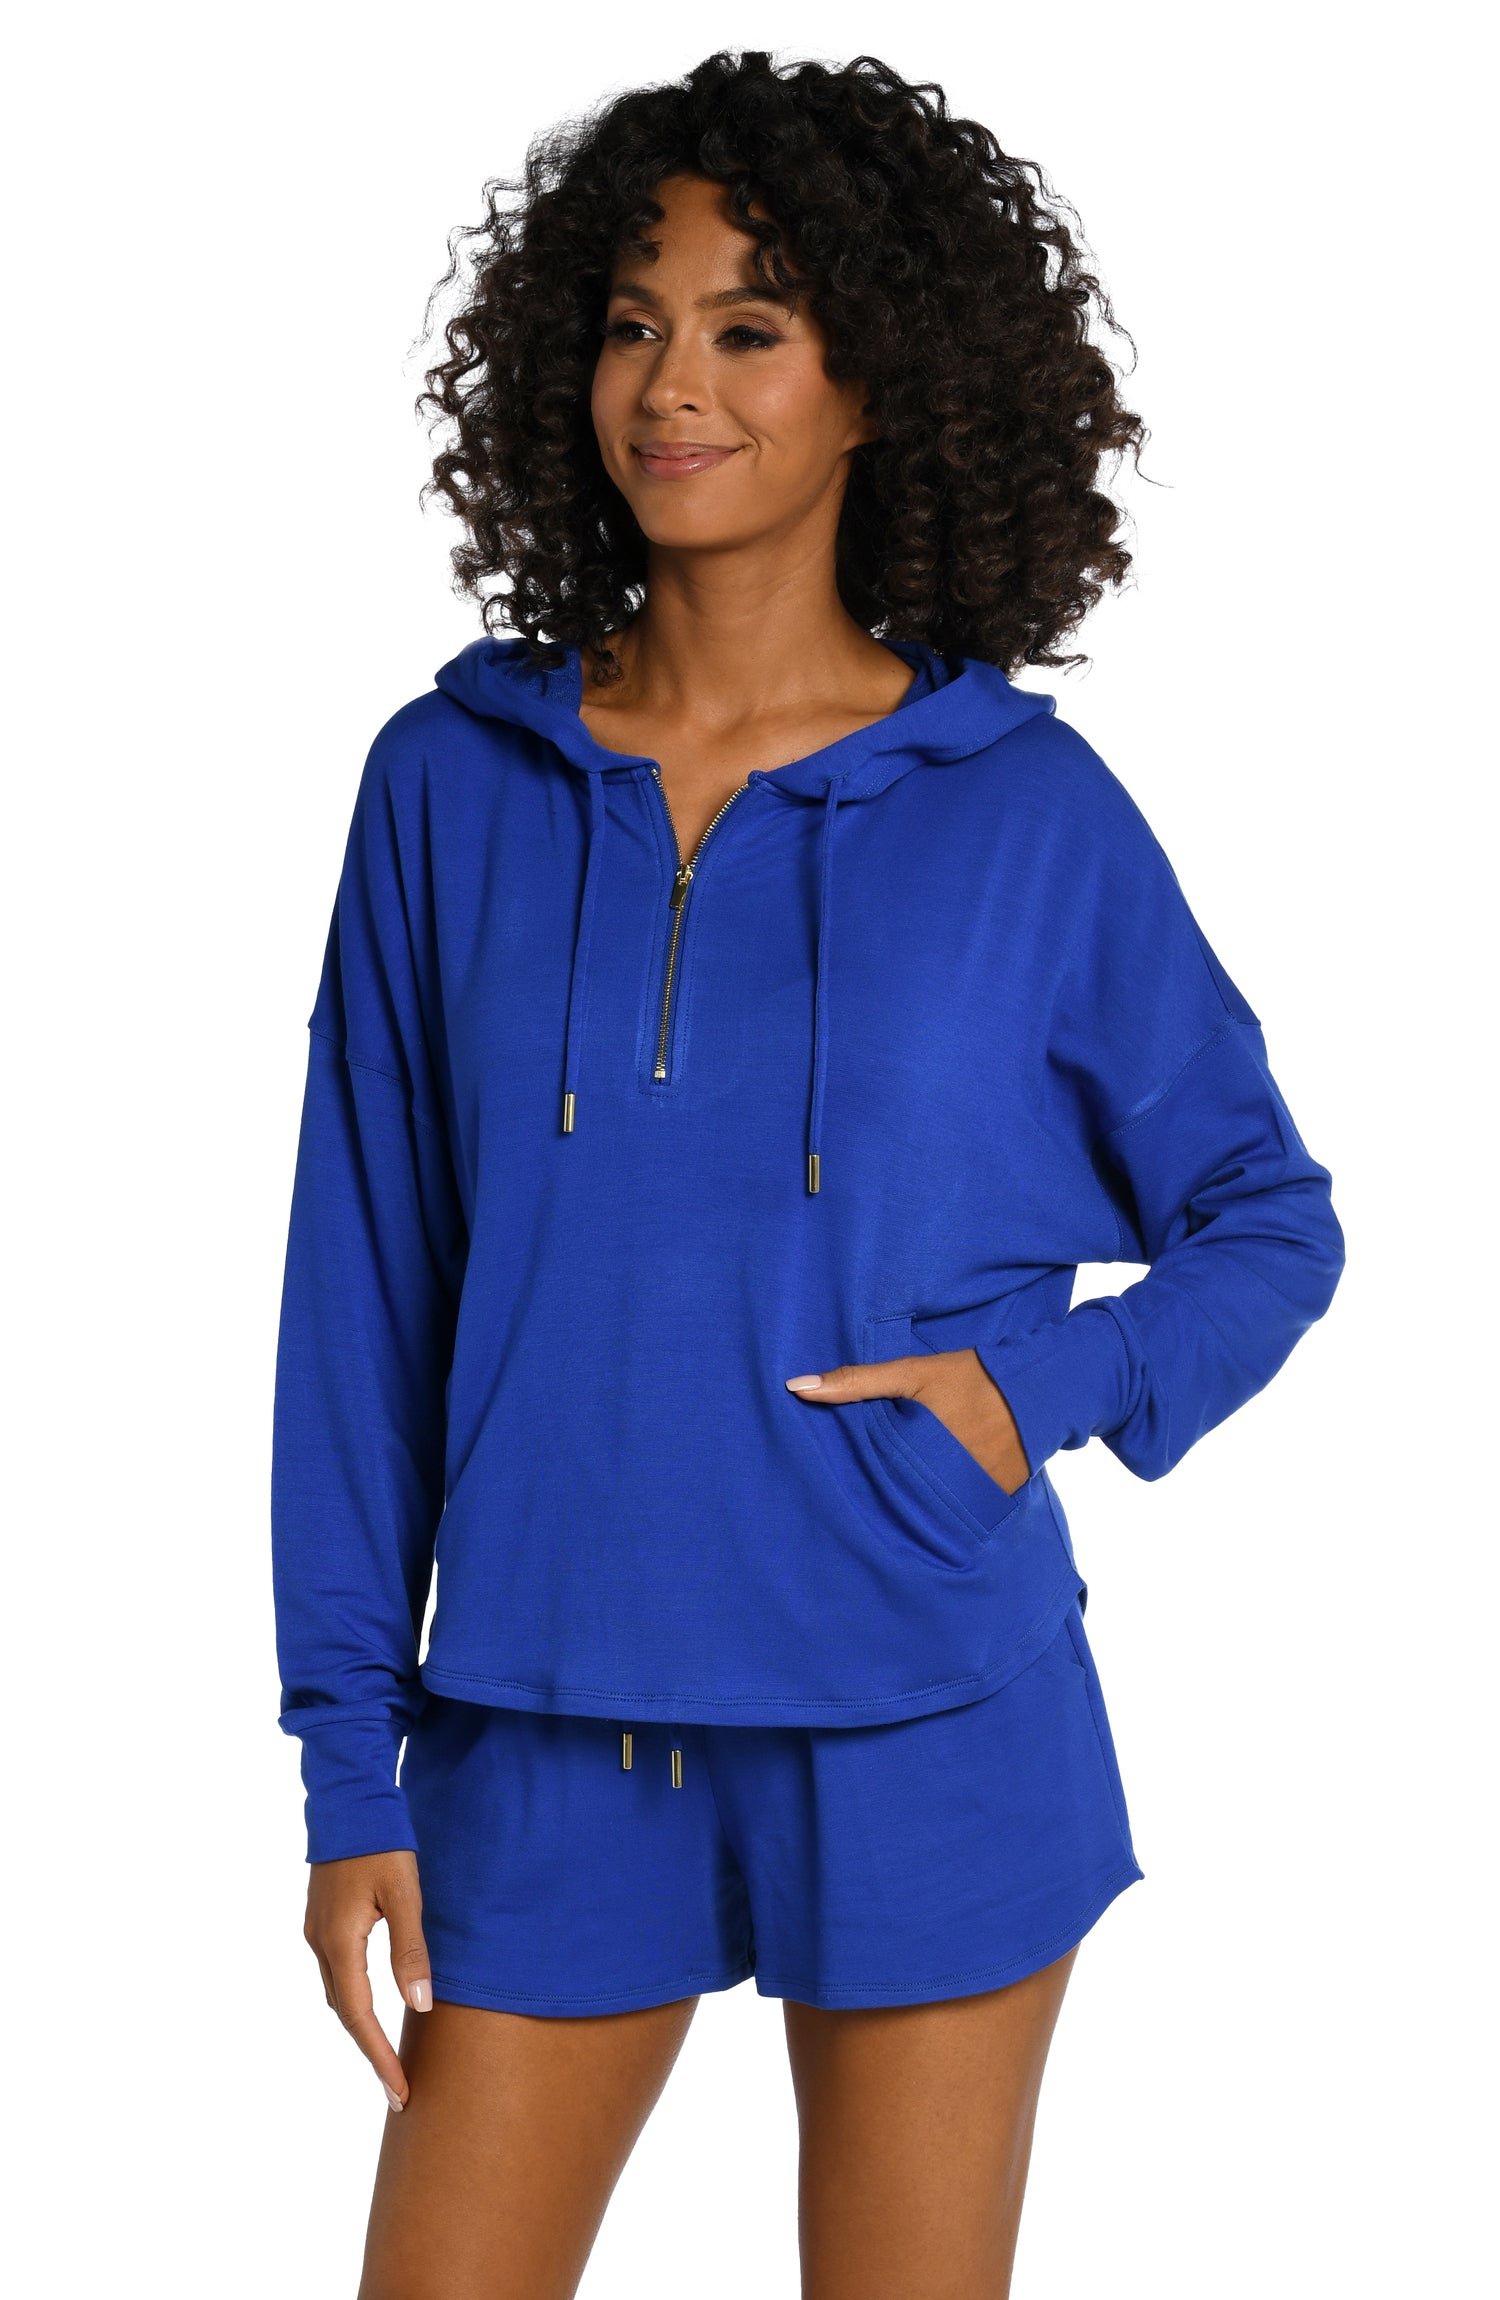 Model is wearing a sapphire colored hooded sweater from our Living in Leisure collection!